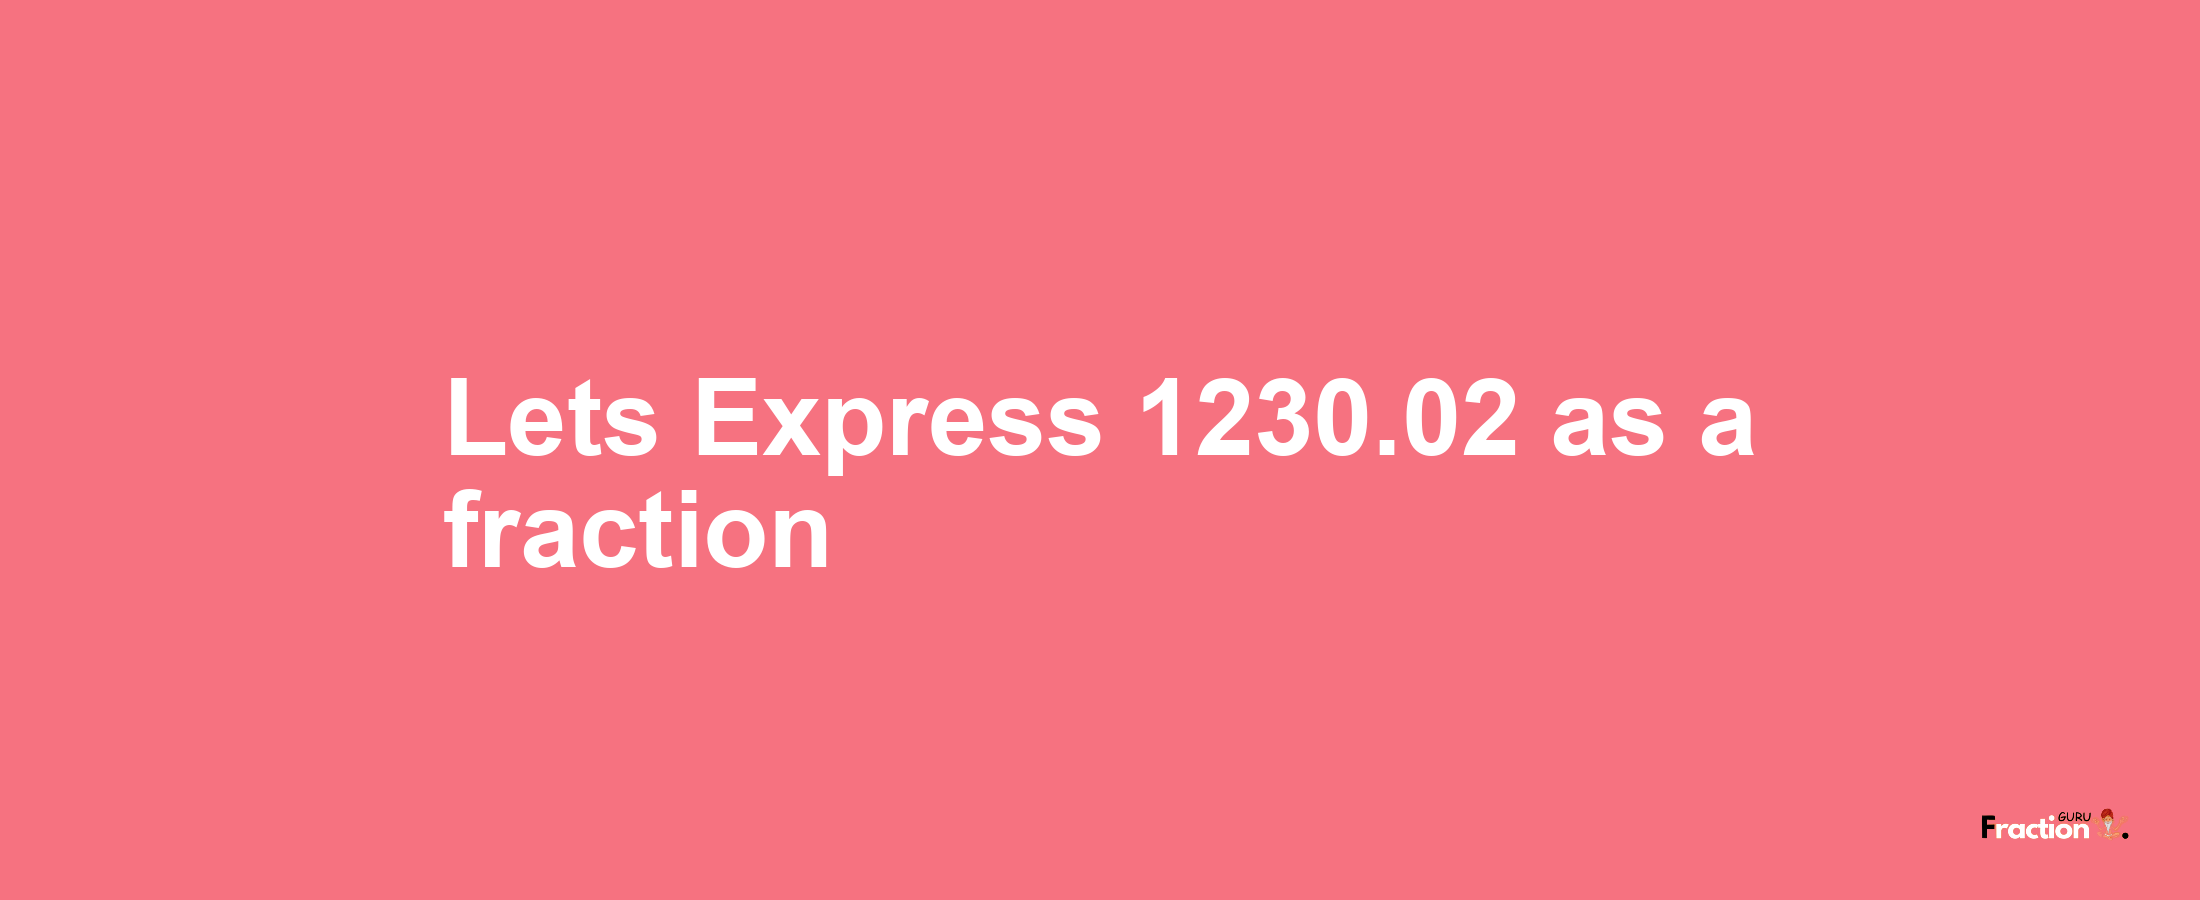 Lets Express 1230.02 as afraction